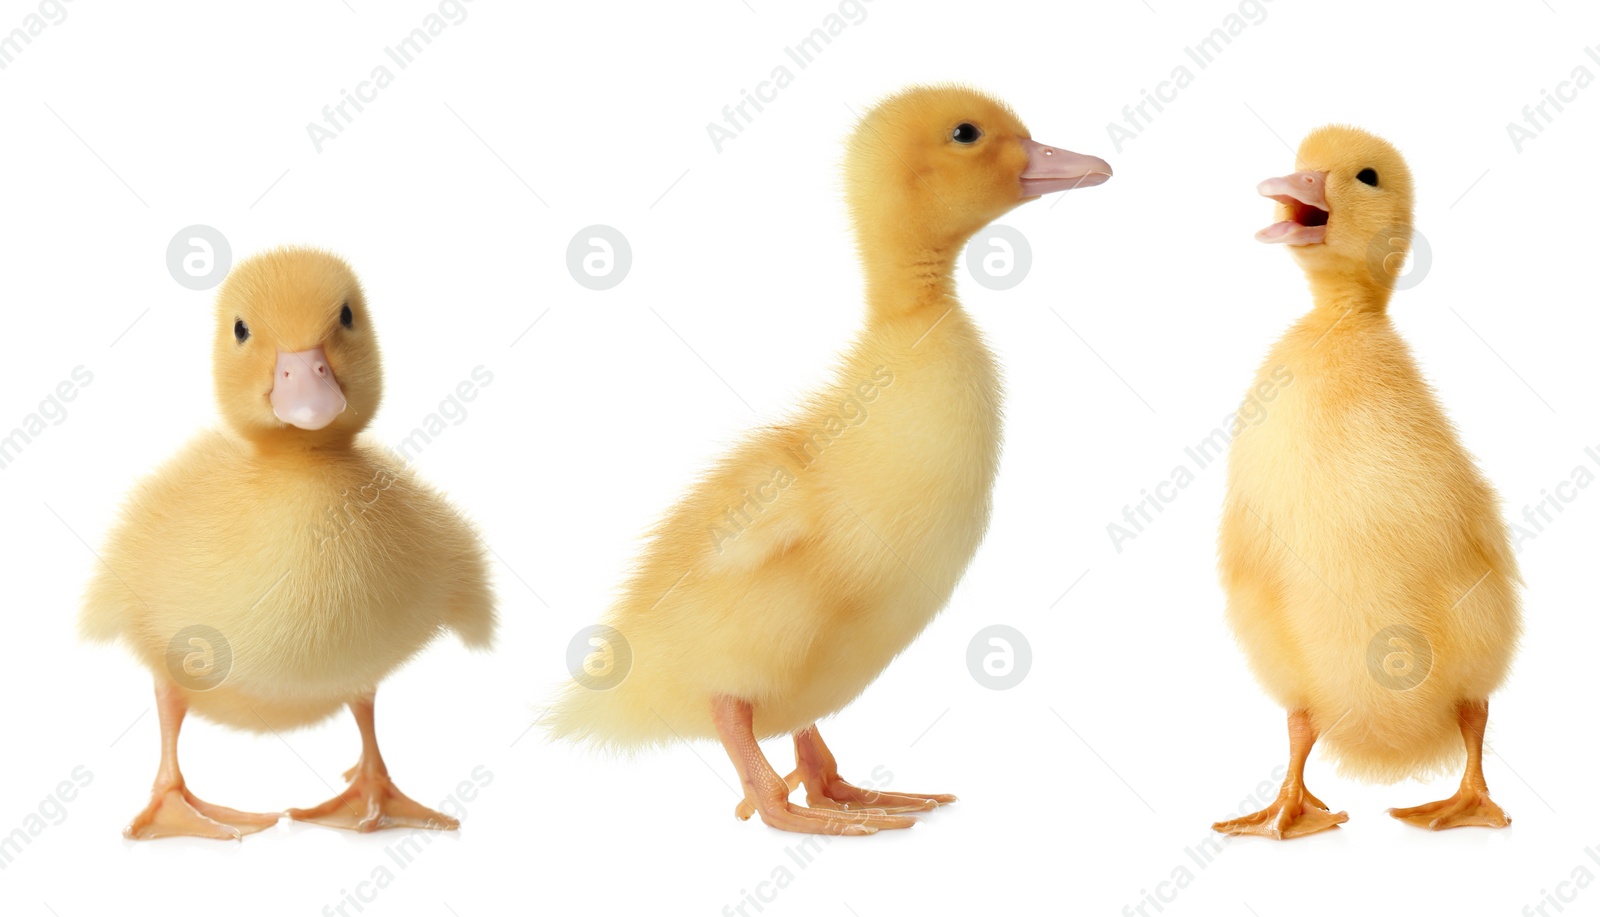 Image of Three cute fluffy ducklings on white background. Farm animals